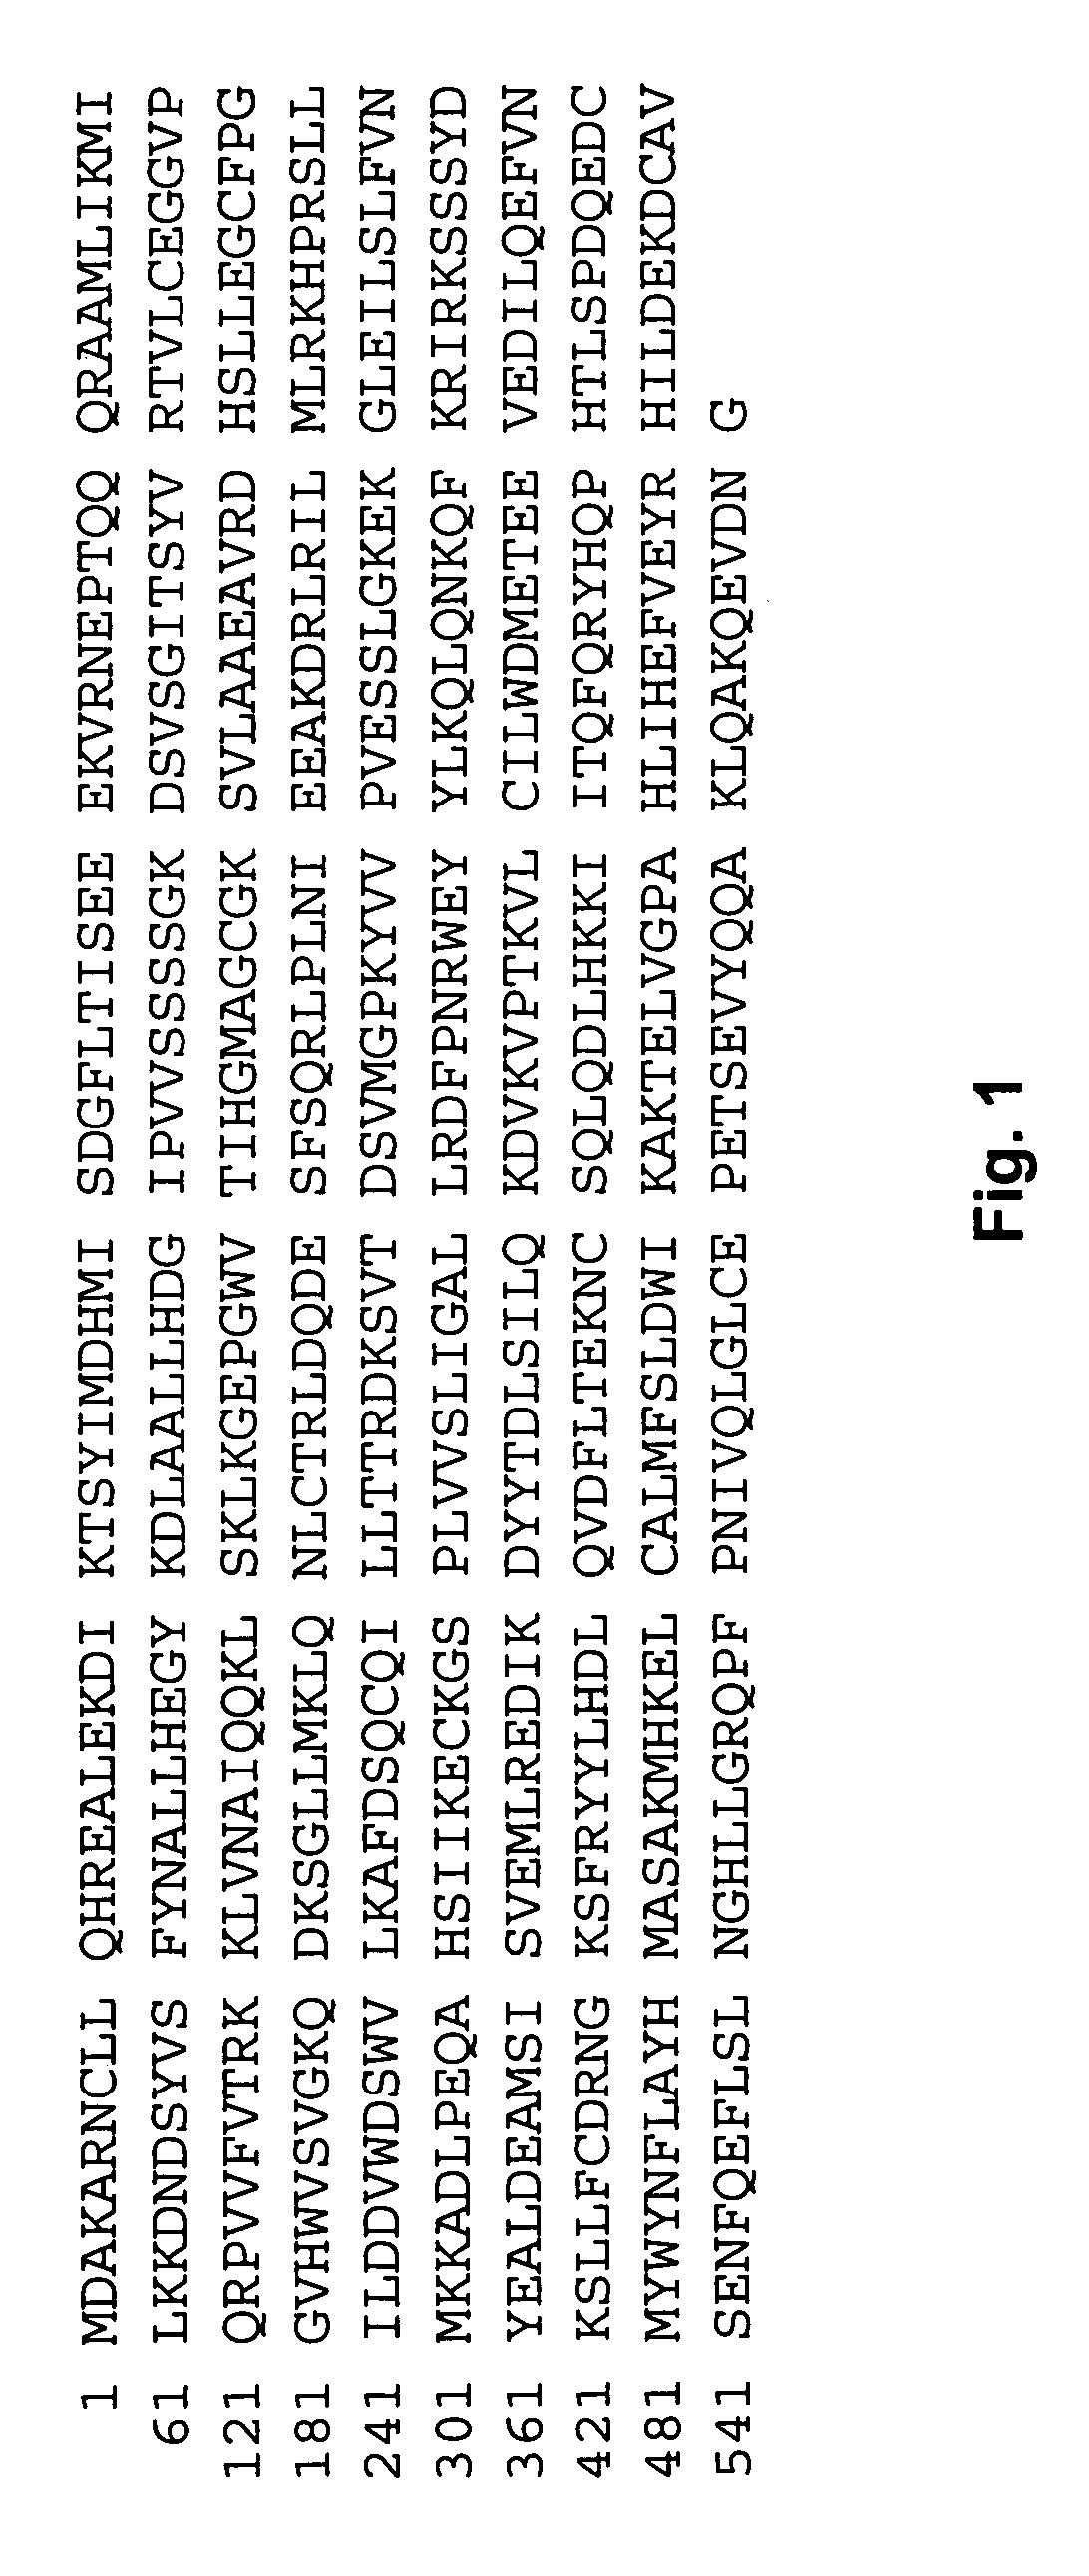 Soluble, functional apoptotic protease-activating factor 1 fragments